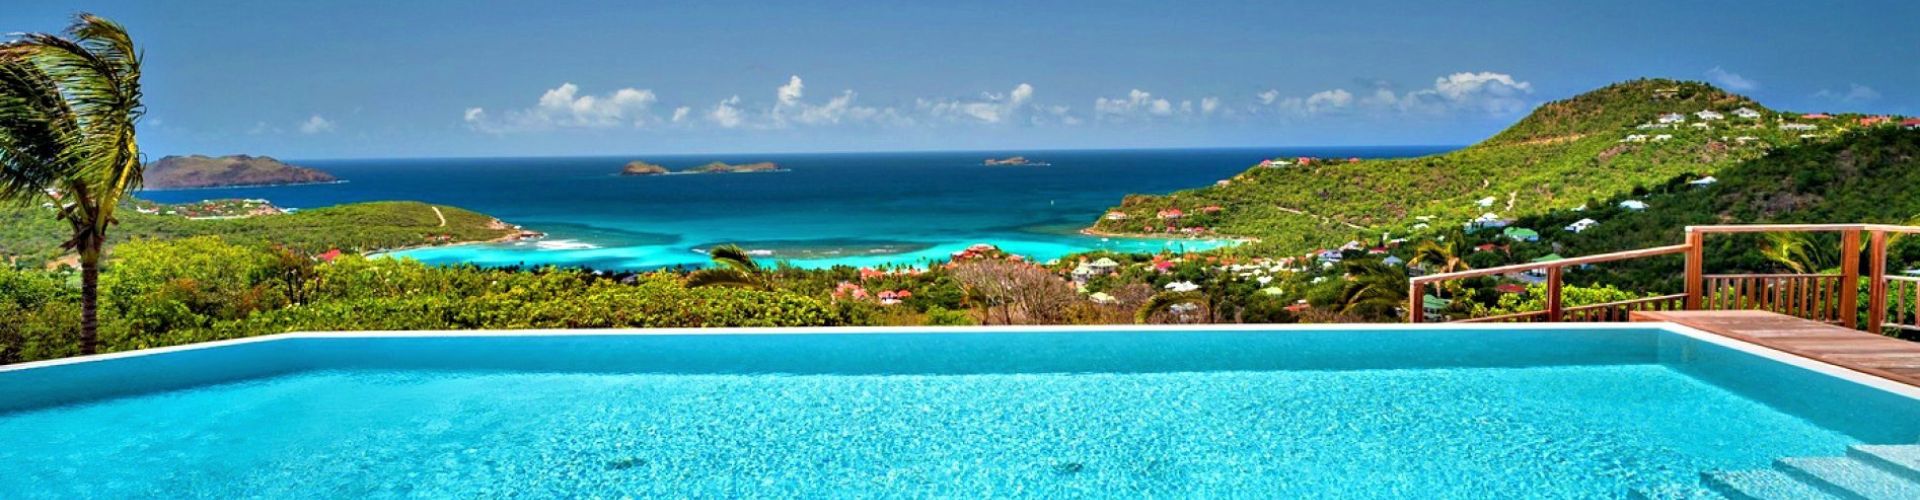 Affordable Caribbean: St. Barts - The New York Times